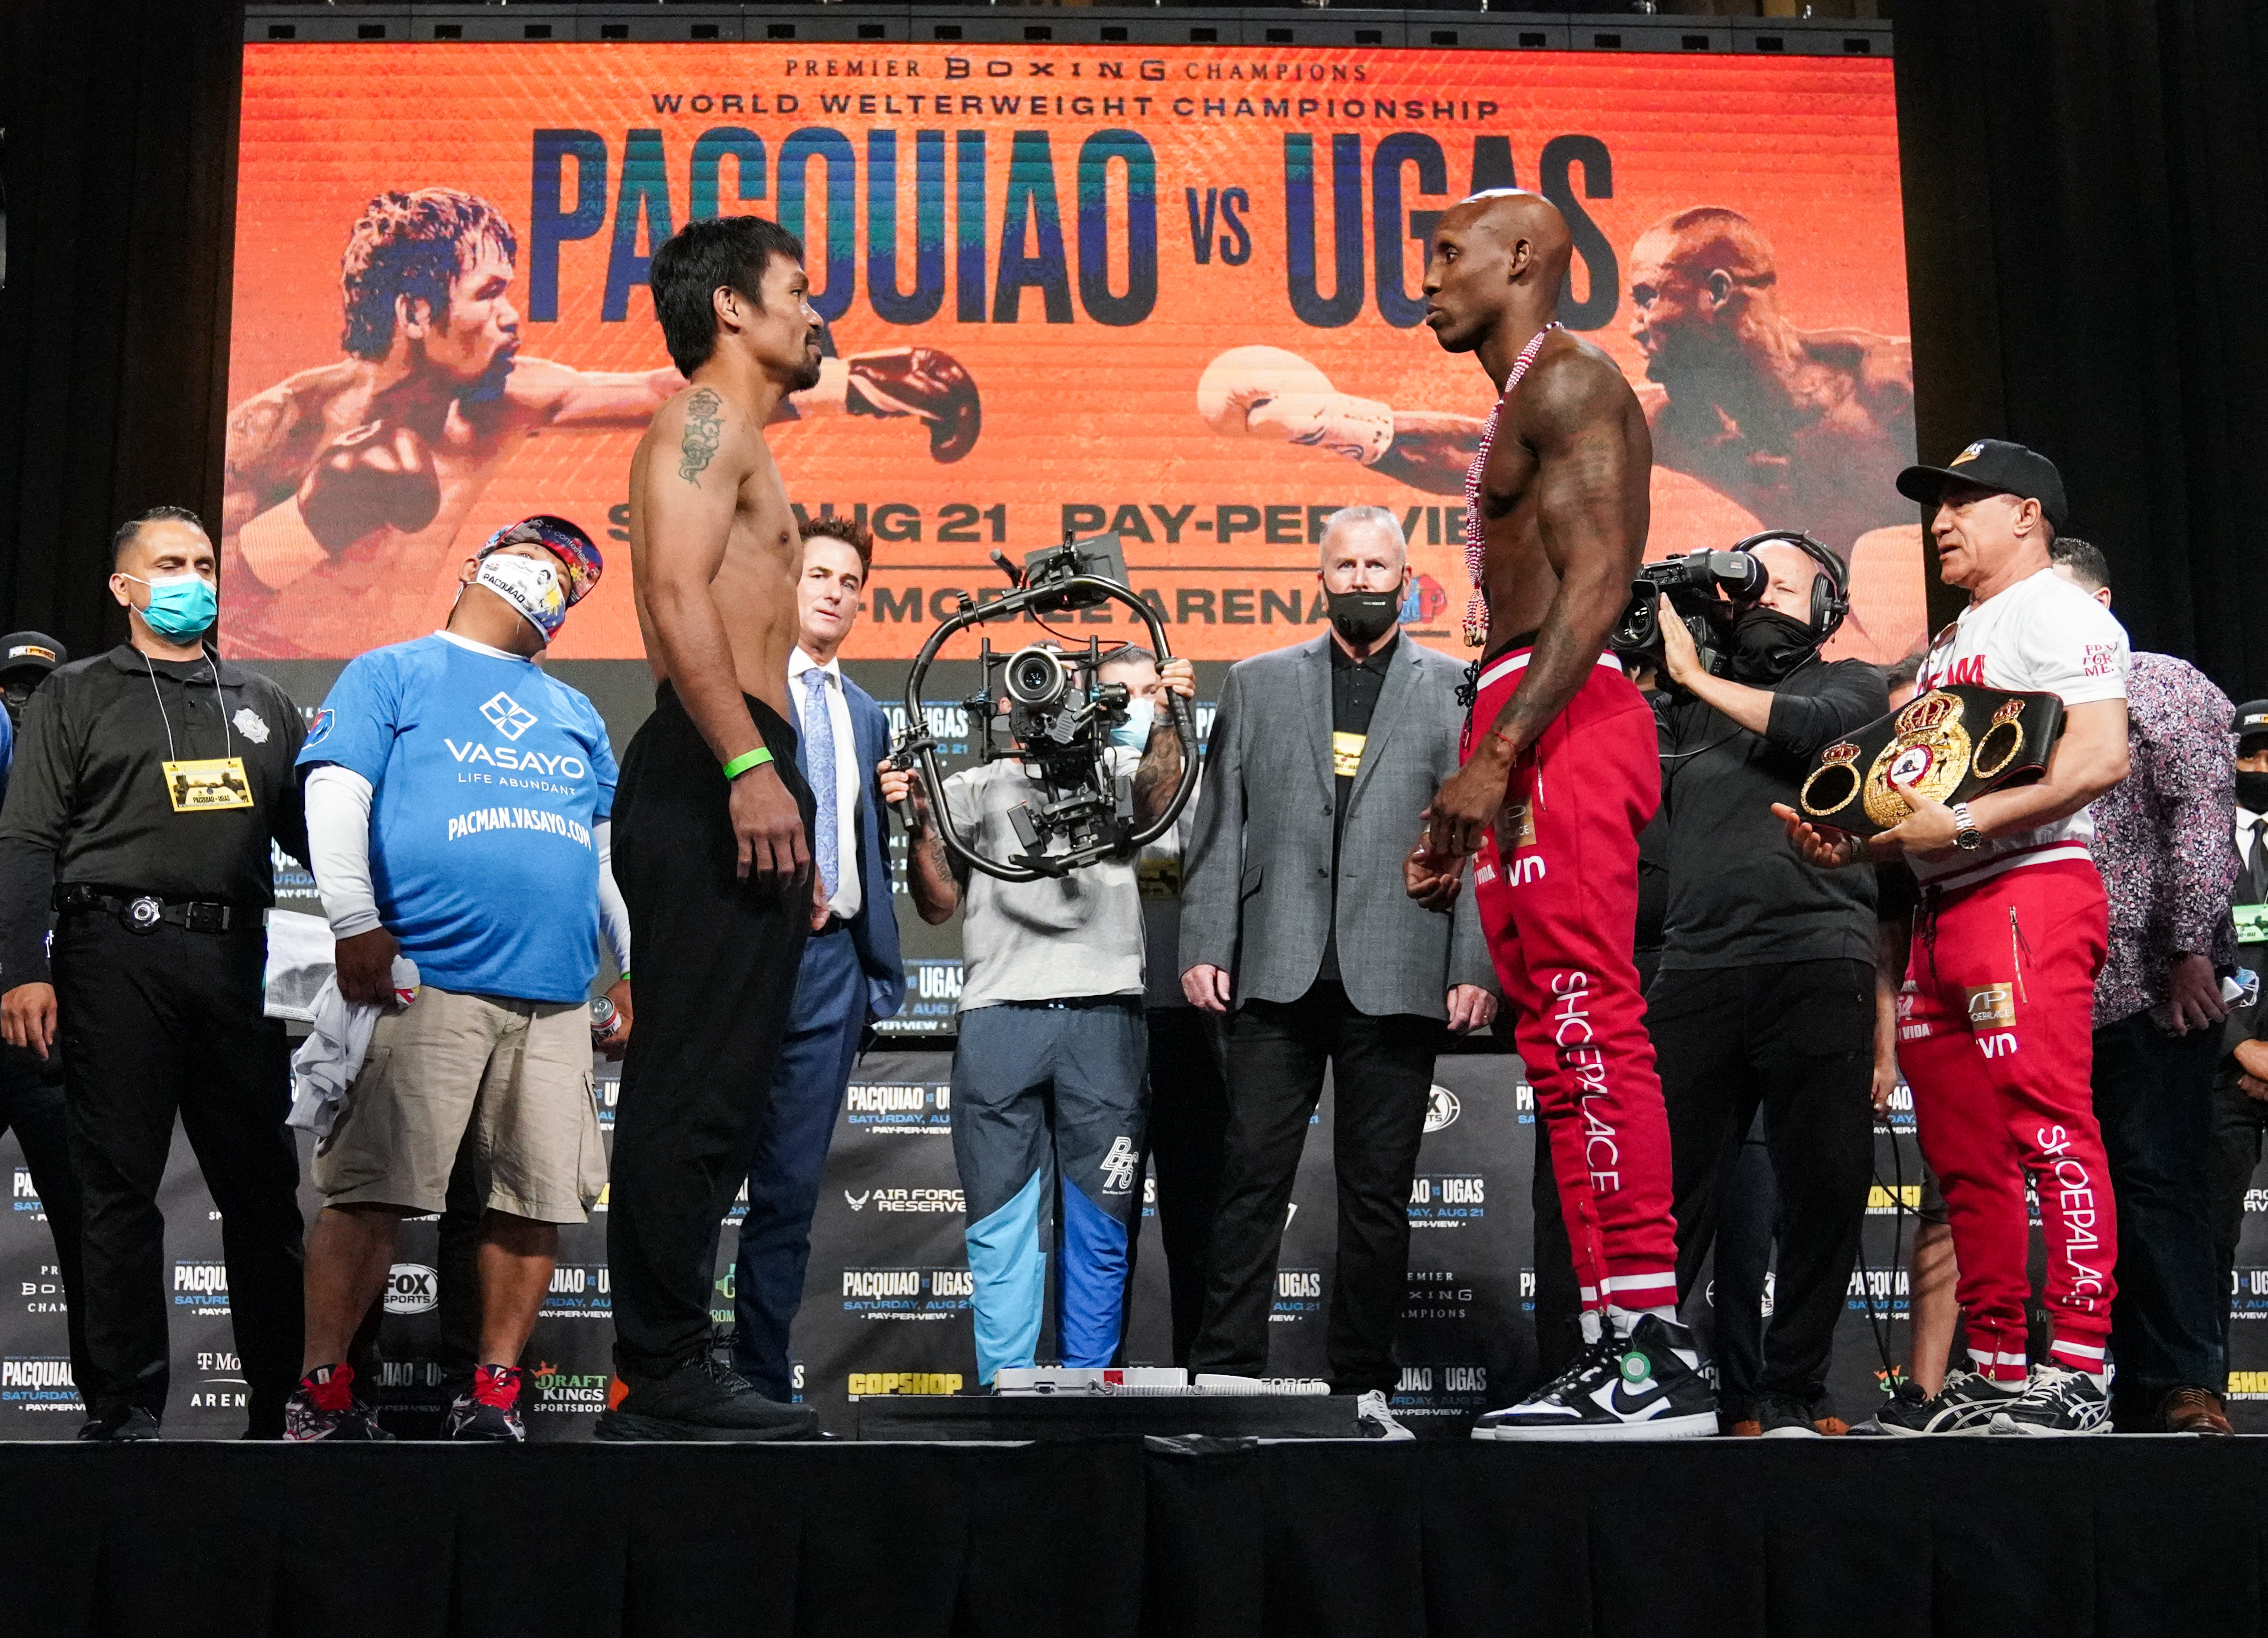 Manny Pacquiao (left) and Yordenis Ugas. Photo by Sean Michael Ham / TGB Promotions